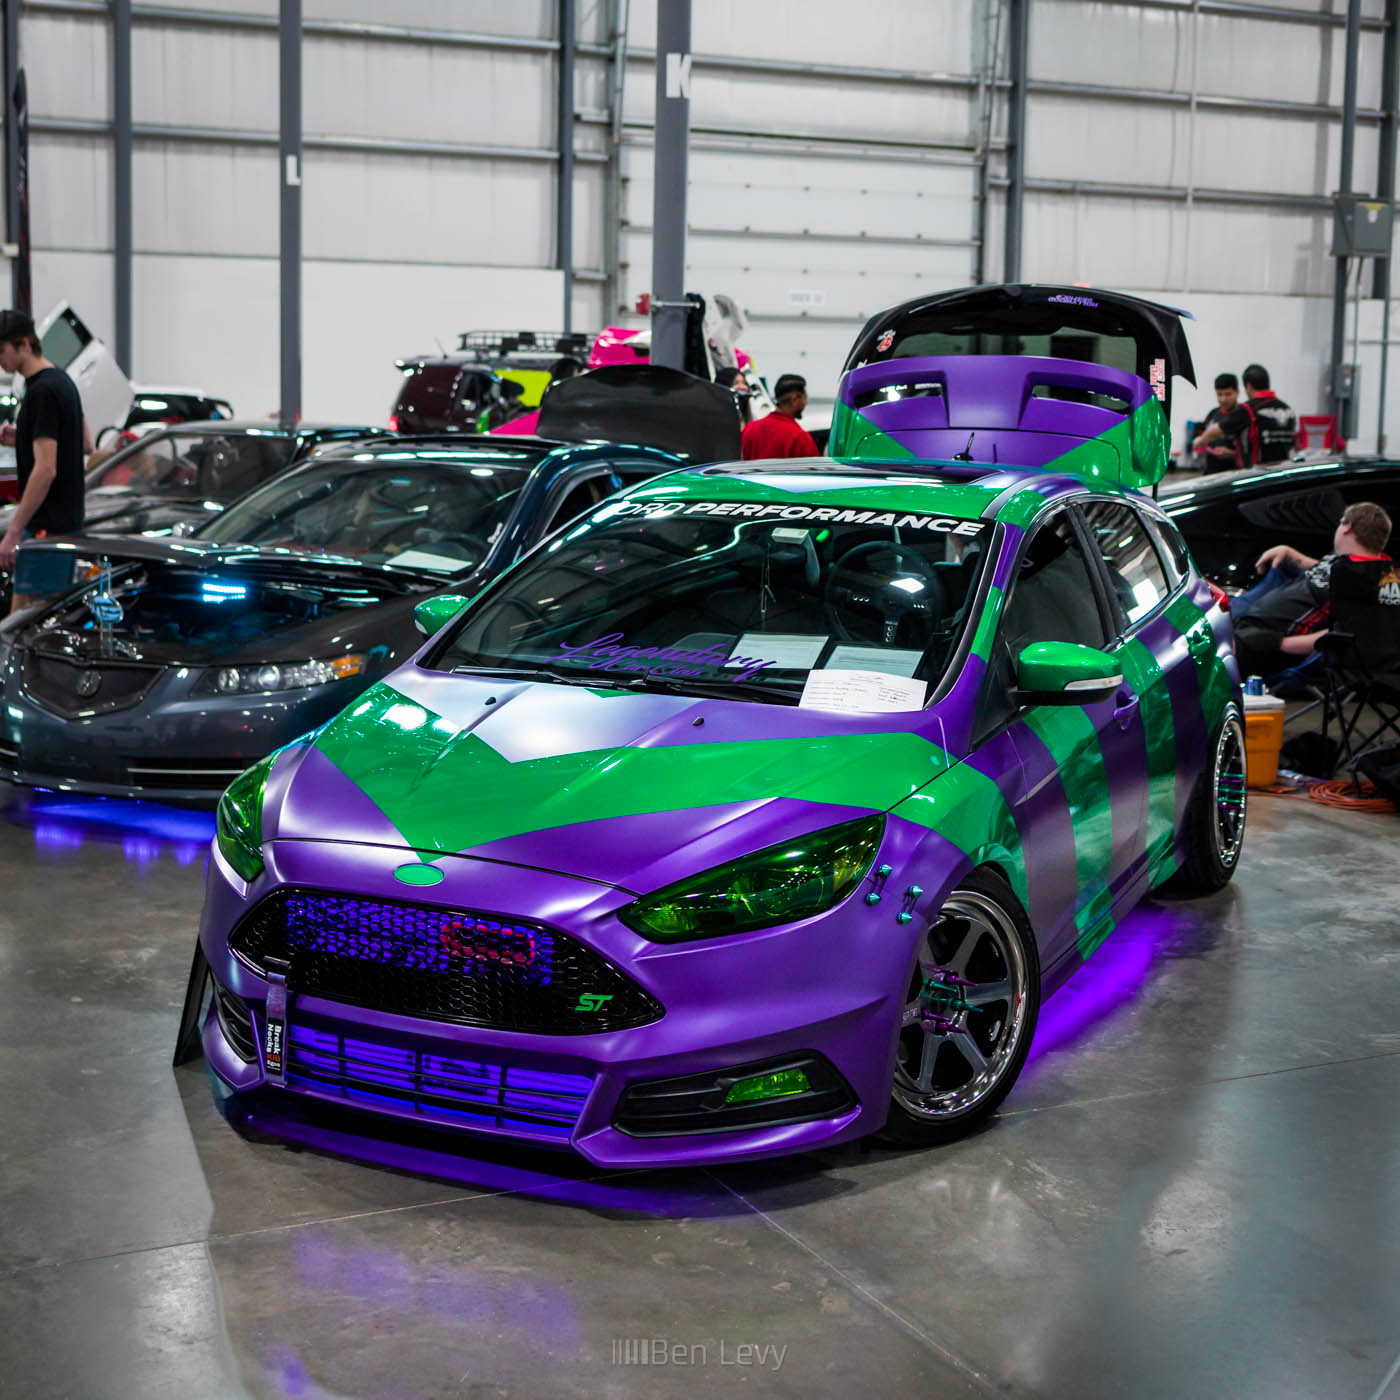 Purple and Green Wrap on Ford Focus ST